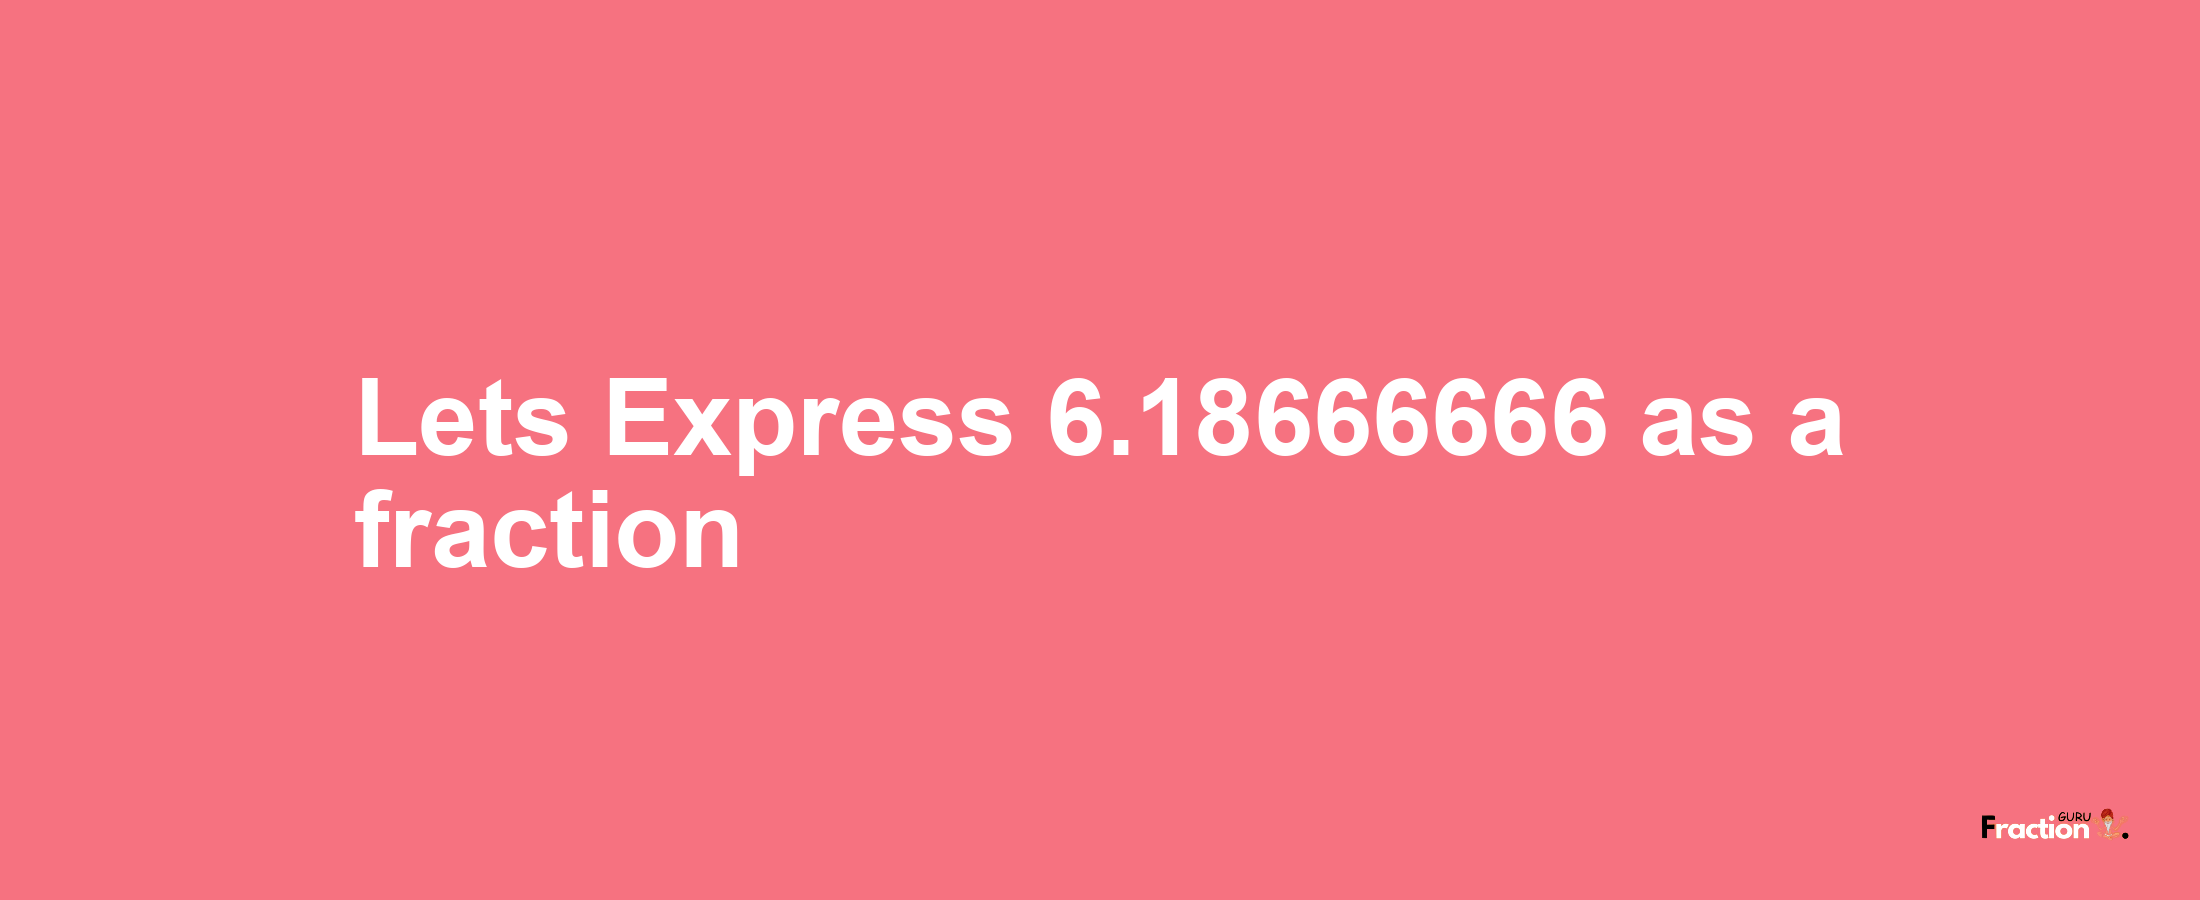 Lets Express 6.18666666 as afraction